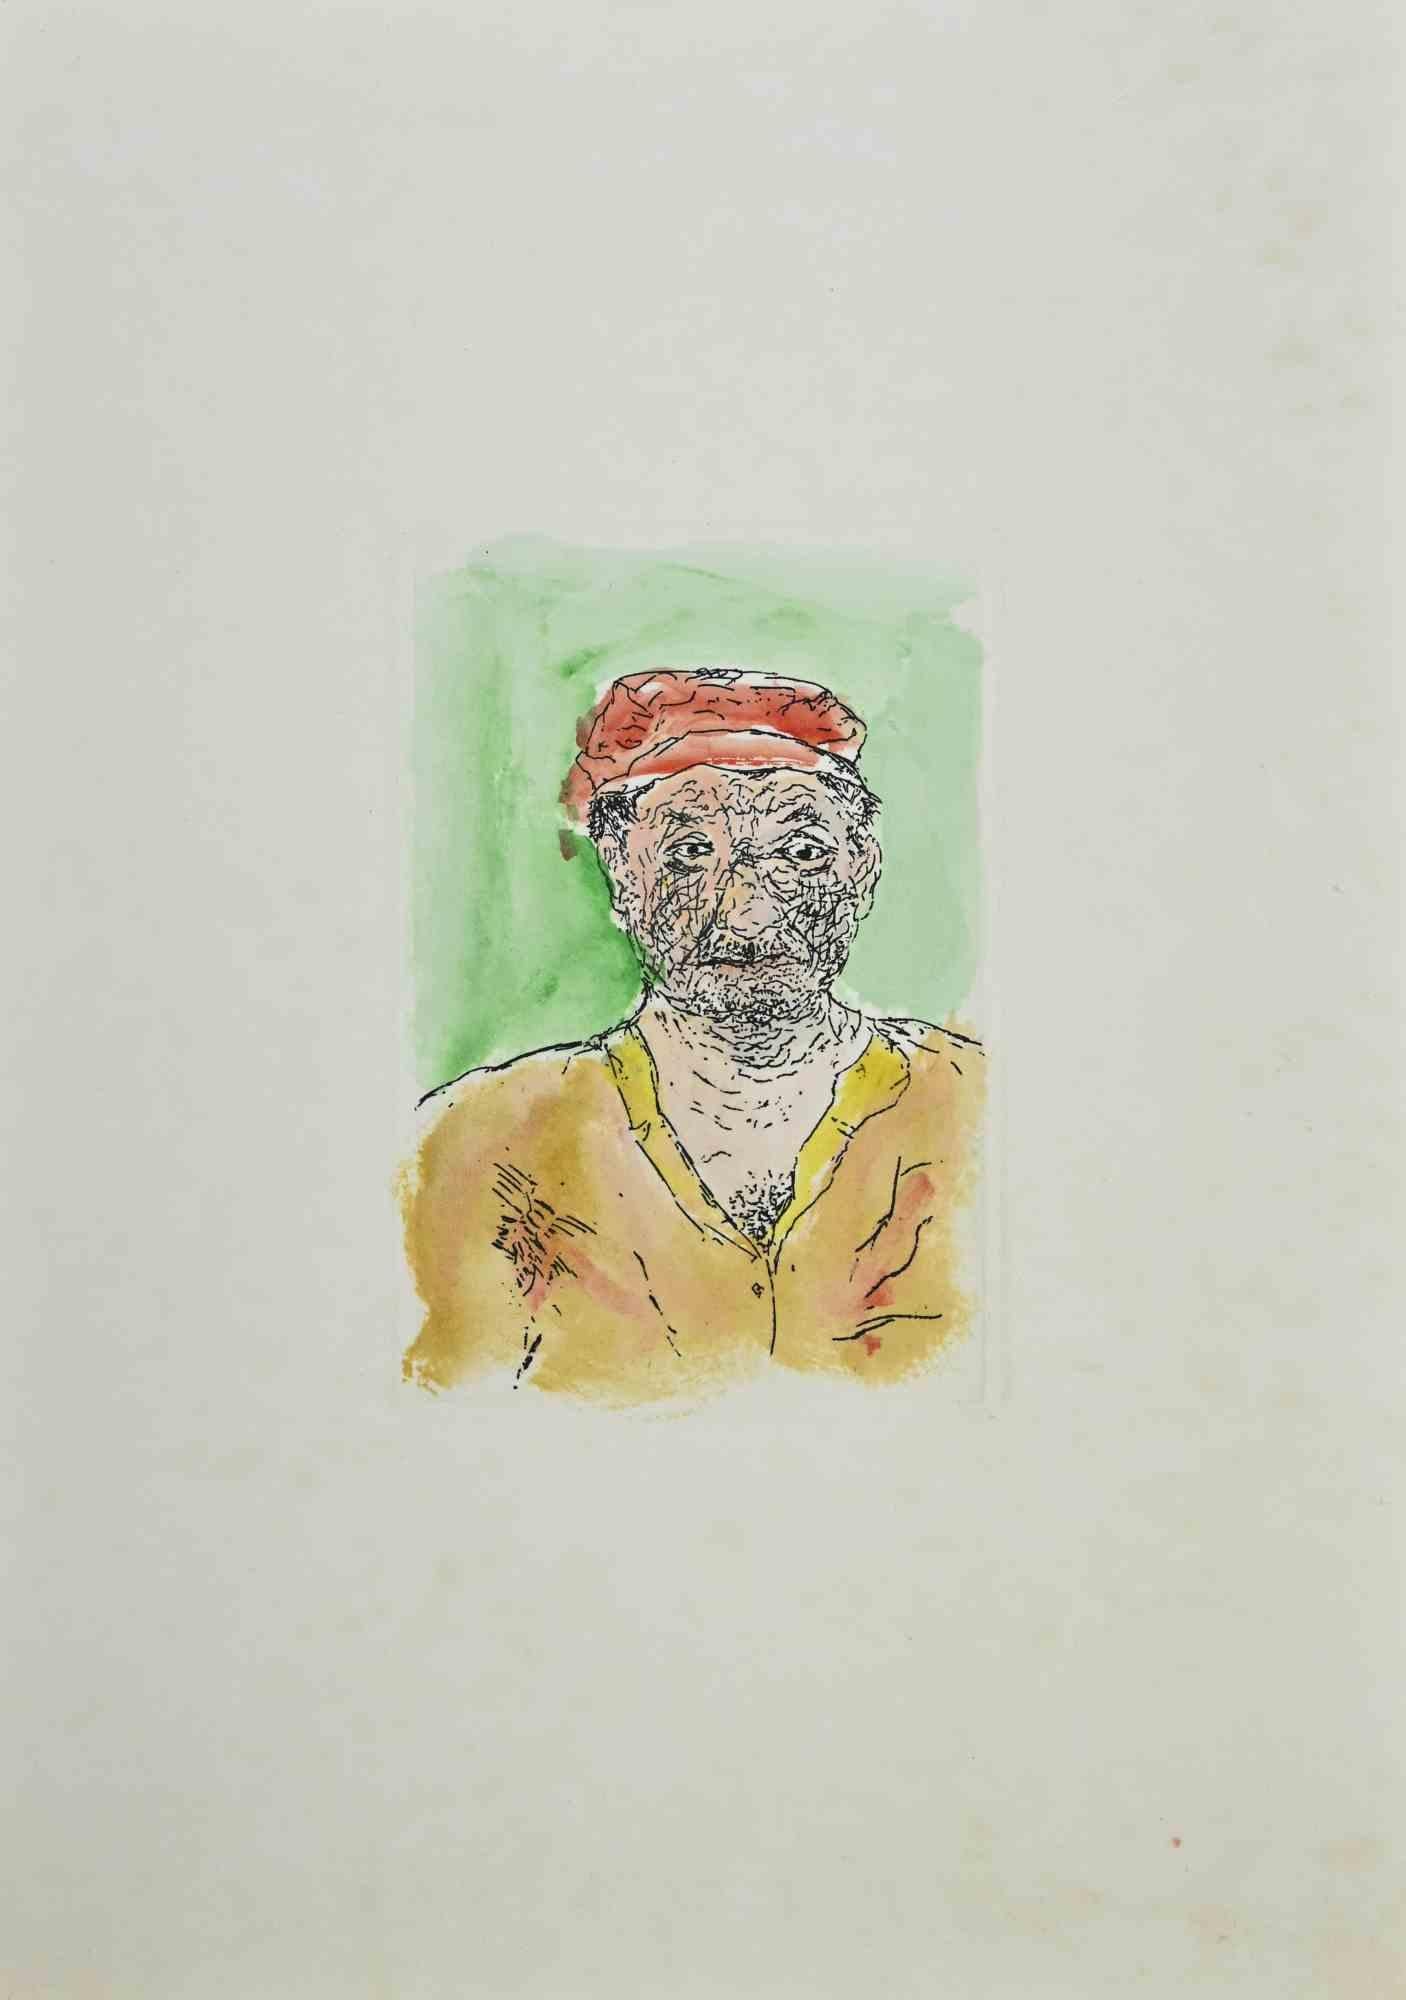 The Fisherman is an artwork realized  by Giovanni Omiccioli (February 25, 1901 – March 1, 1975).

Original Colored etching on cardboard.

The artist wants to define a well-balanced composition, through preciseness and congruous colors. 

Good